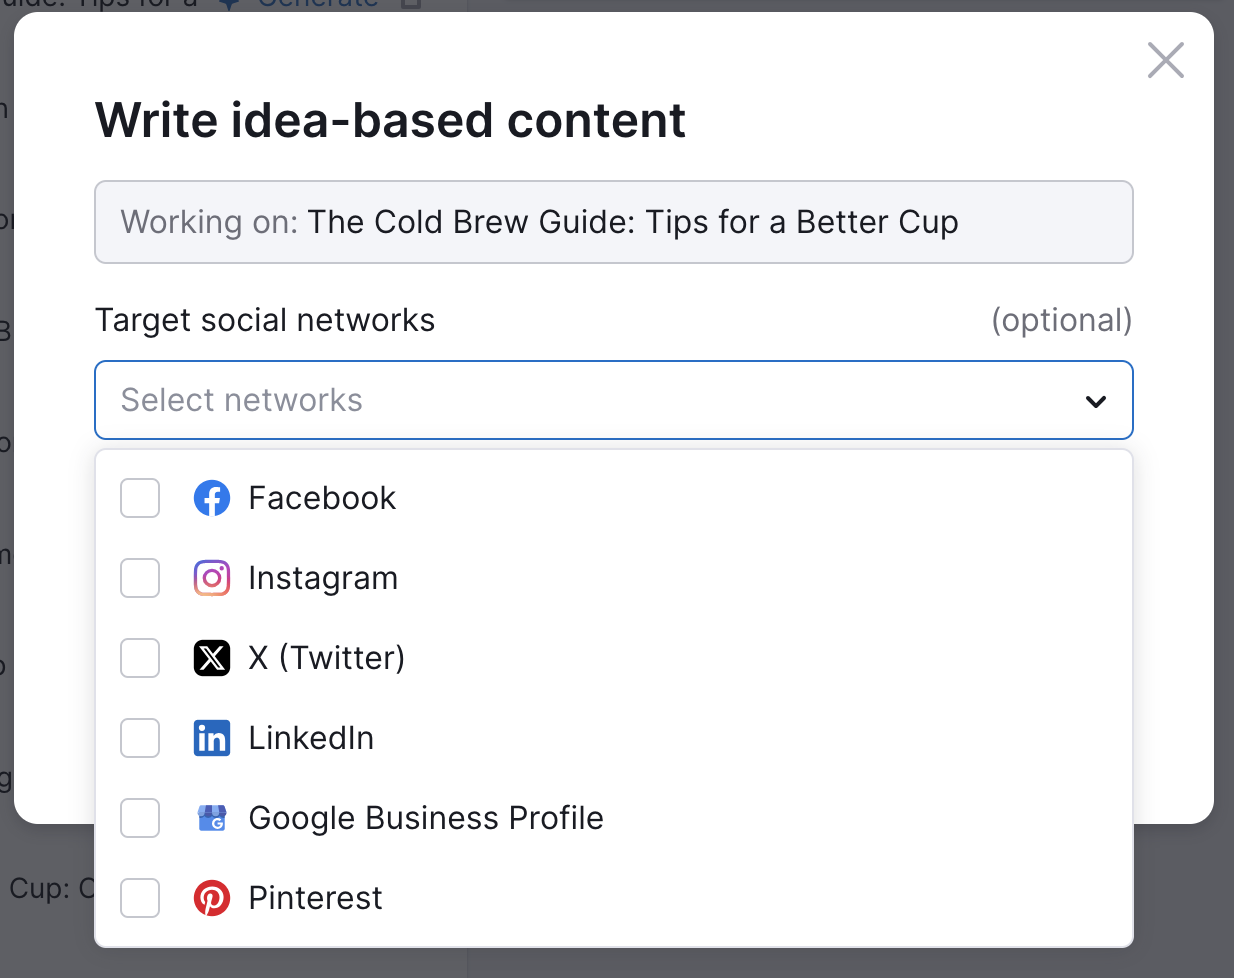 Target social networks options in the drop-down.